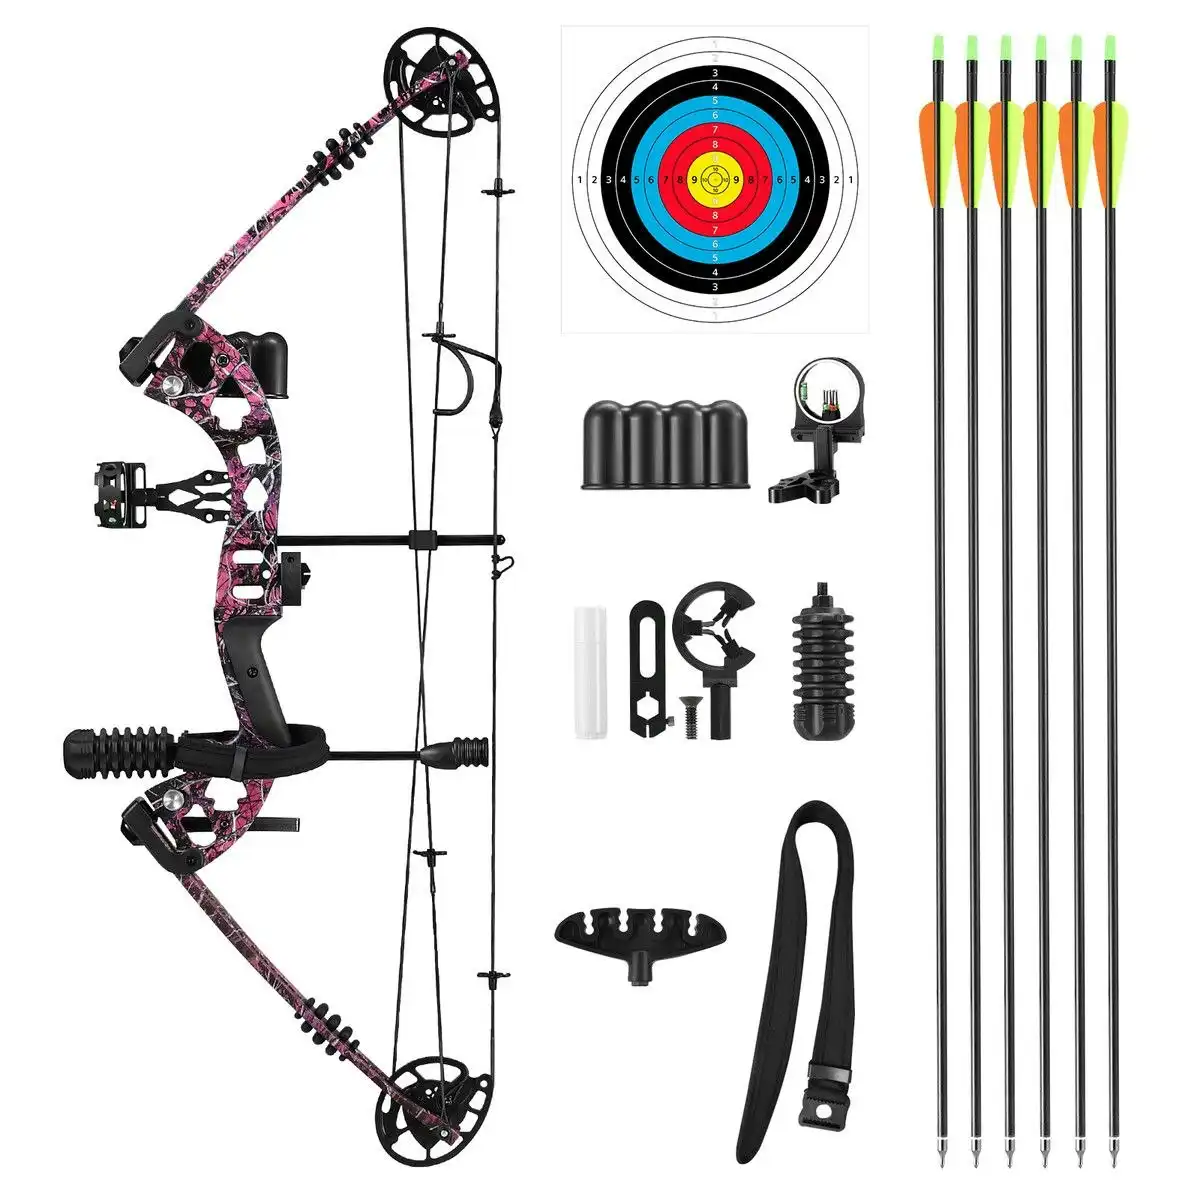 Ausway Compound Bow Arrows Set Archery Equipment Hunting Target Shooting Sports Practice Kit 20-55lbs RH Adjustable 310fps Speed Adult Beginner Master